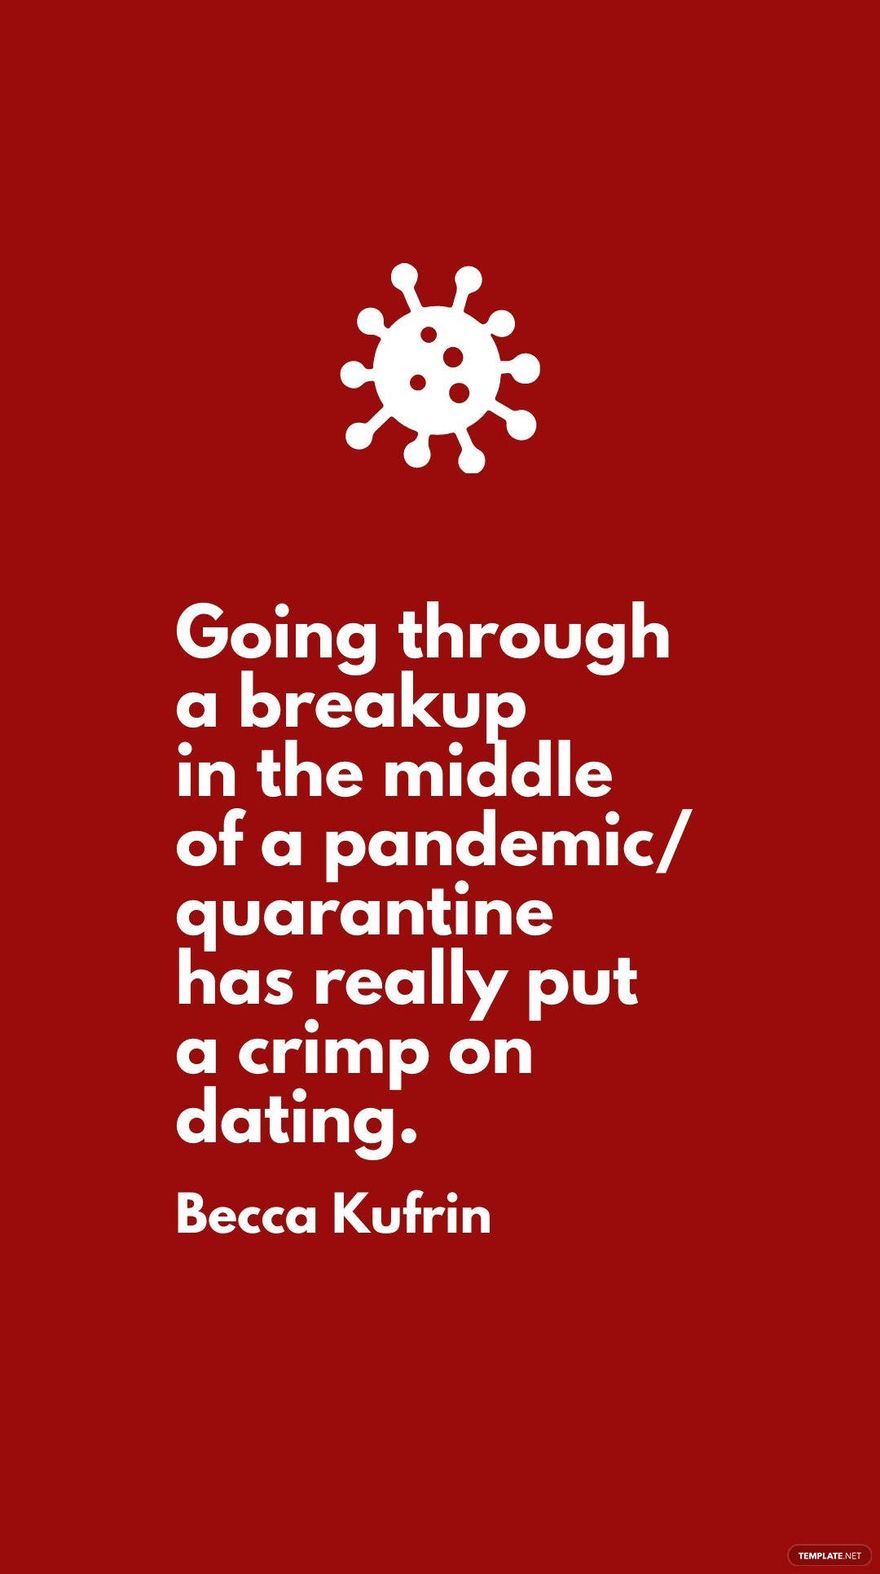 Becca Kufrin - Going through a breakup in the middle of a pandemic/quarantine has really put a crimp on dating.